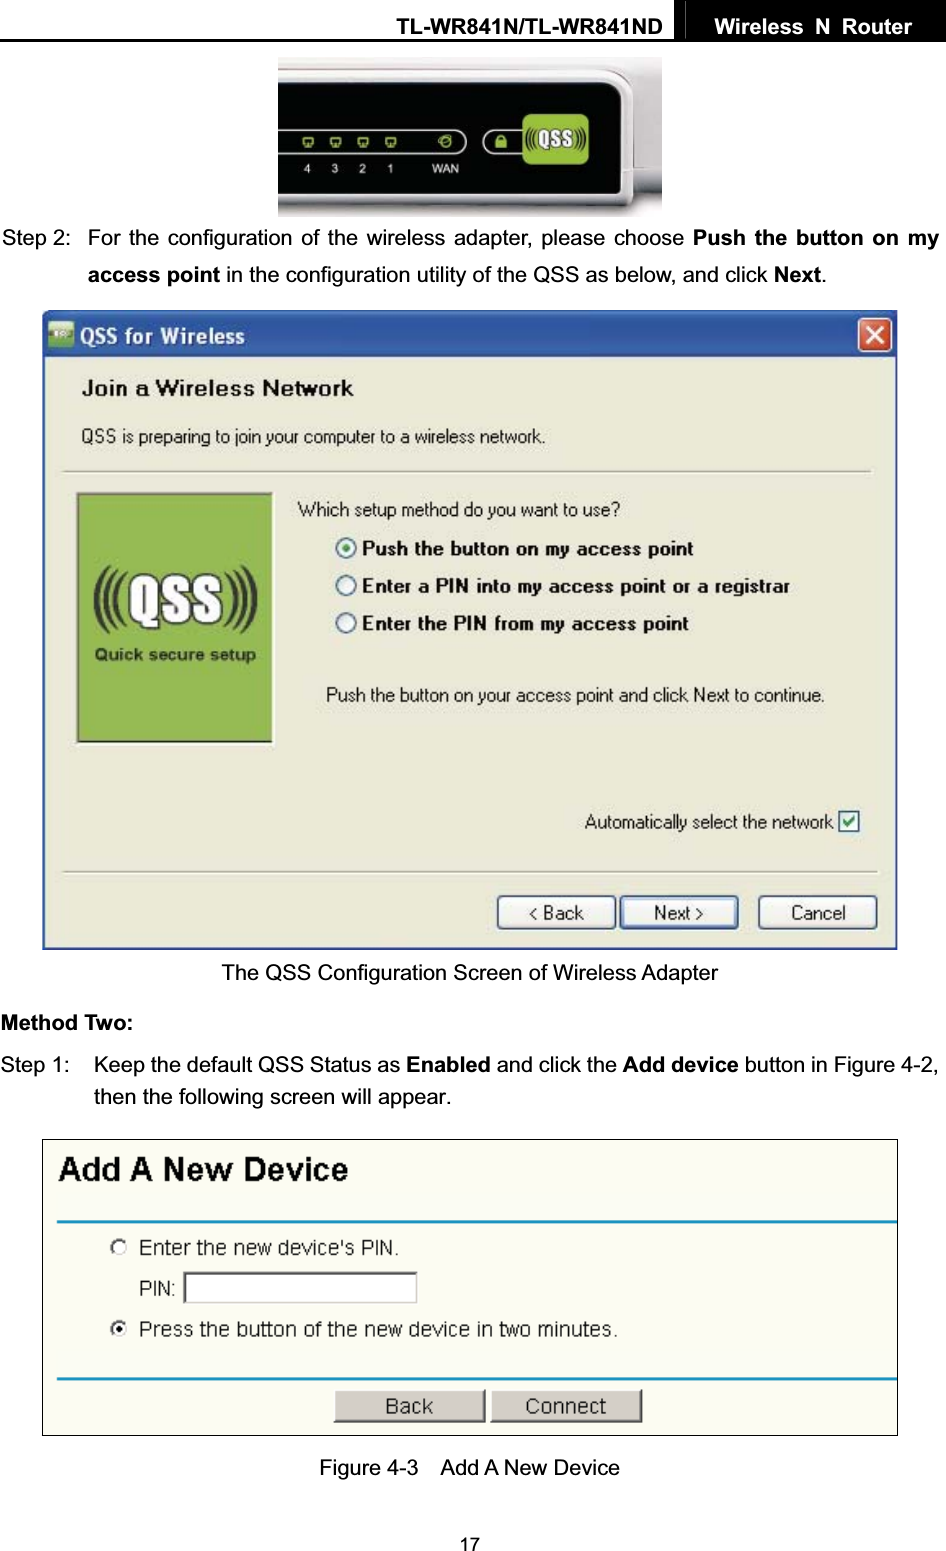 TL-WR841N/TL-WR841ND  Wireless N Router  17Step 2:  For the configuration of the wireless adapter, please choose Push the button on my access point in the configuration utility of the QSS as below, and click Next.The QSS Configuration Screen of Wireless Adapter Method Two: Step 1:  Keep the default QSS Status as Enabled and click the Add device button in Figure 4-2, then the following screen will appear. Figure 4-3  Add A New Device 